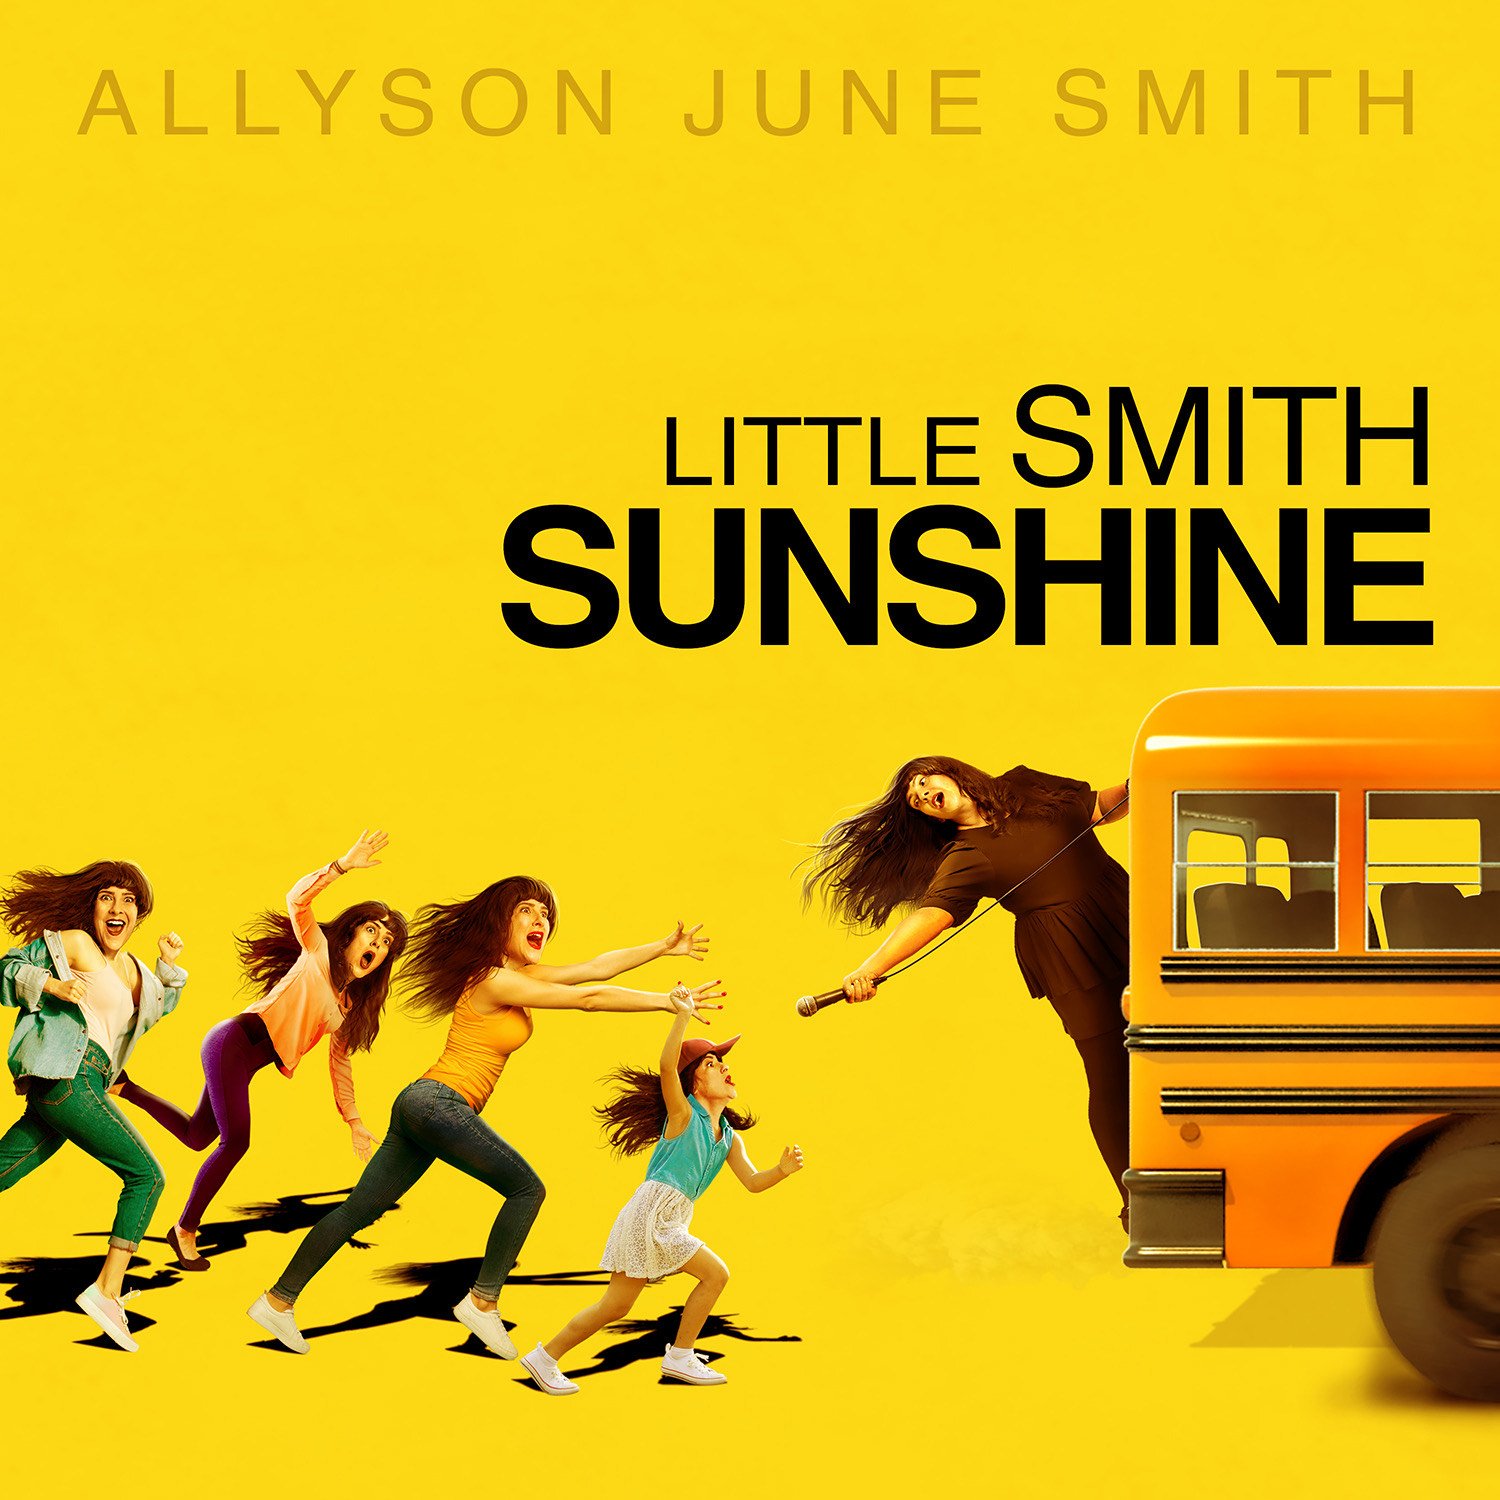 A bus is leaving the image with a lady hanging off the back. A group of girls run after it. All the faces are of Allyson June Smith.